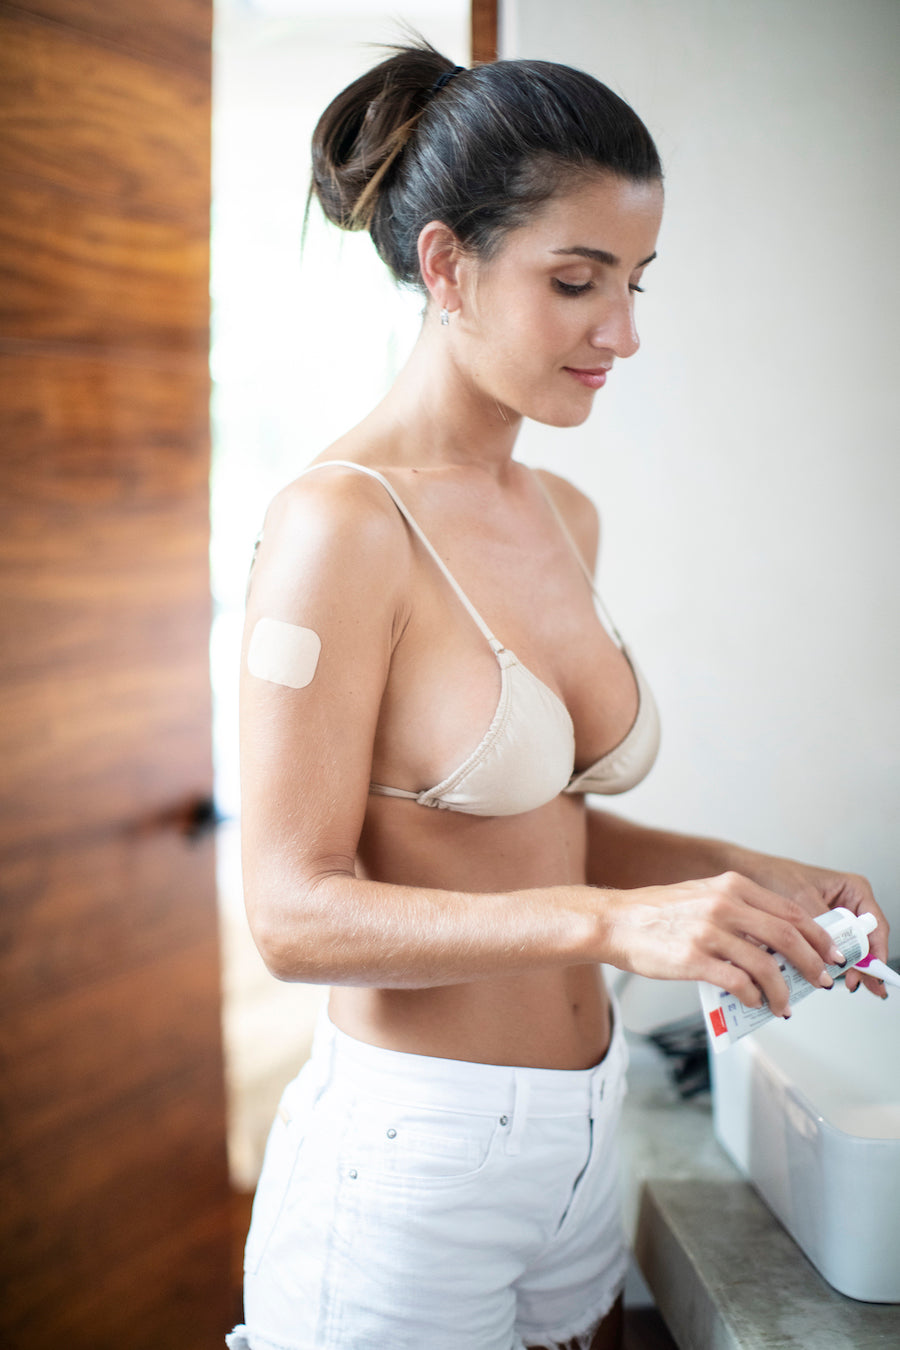 Attractive woman wearing a bra and white shorts brushing her teeth, wearing a transdermal patch on her shoulder